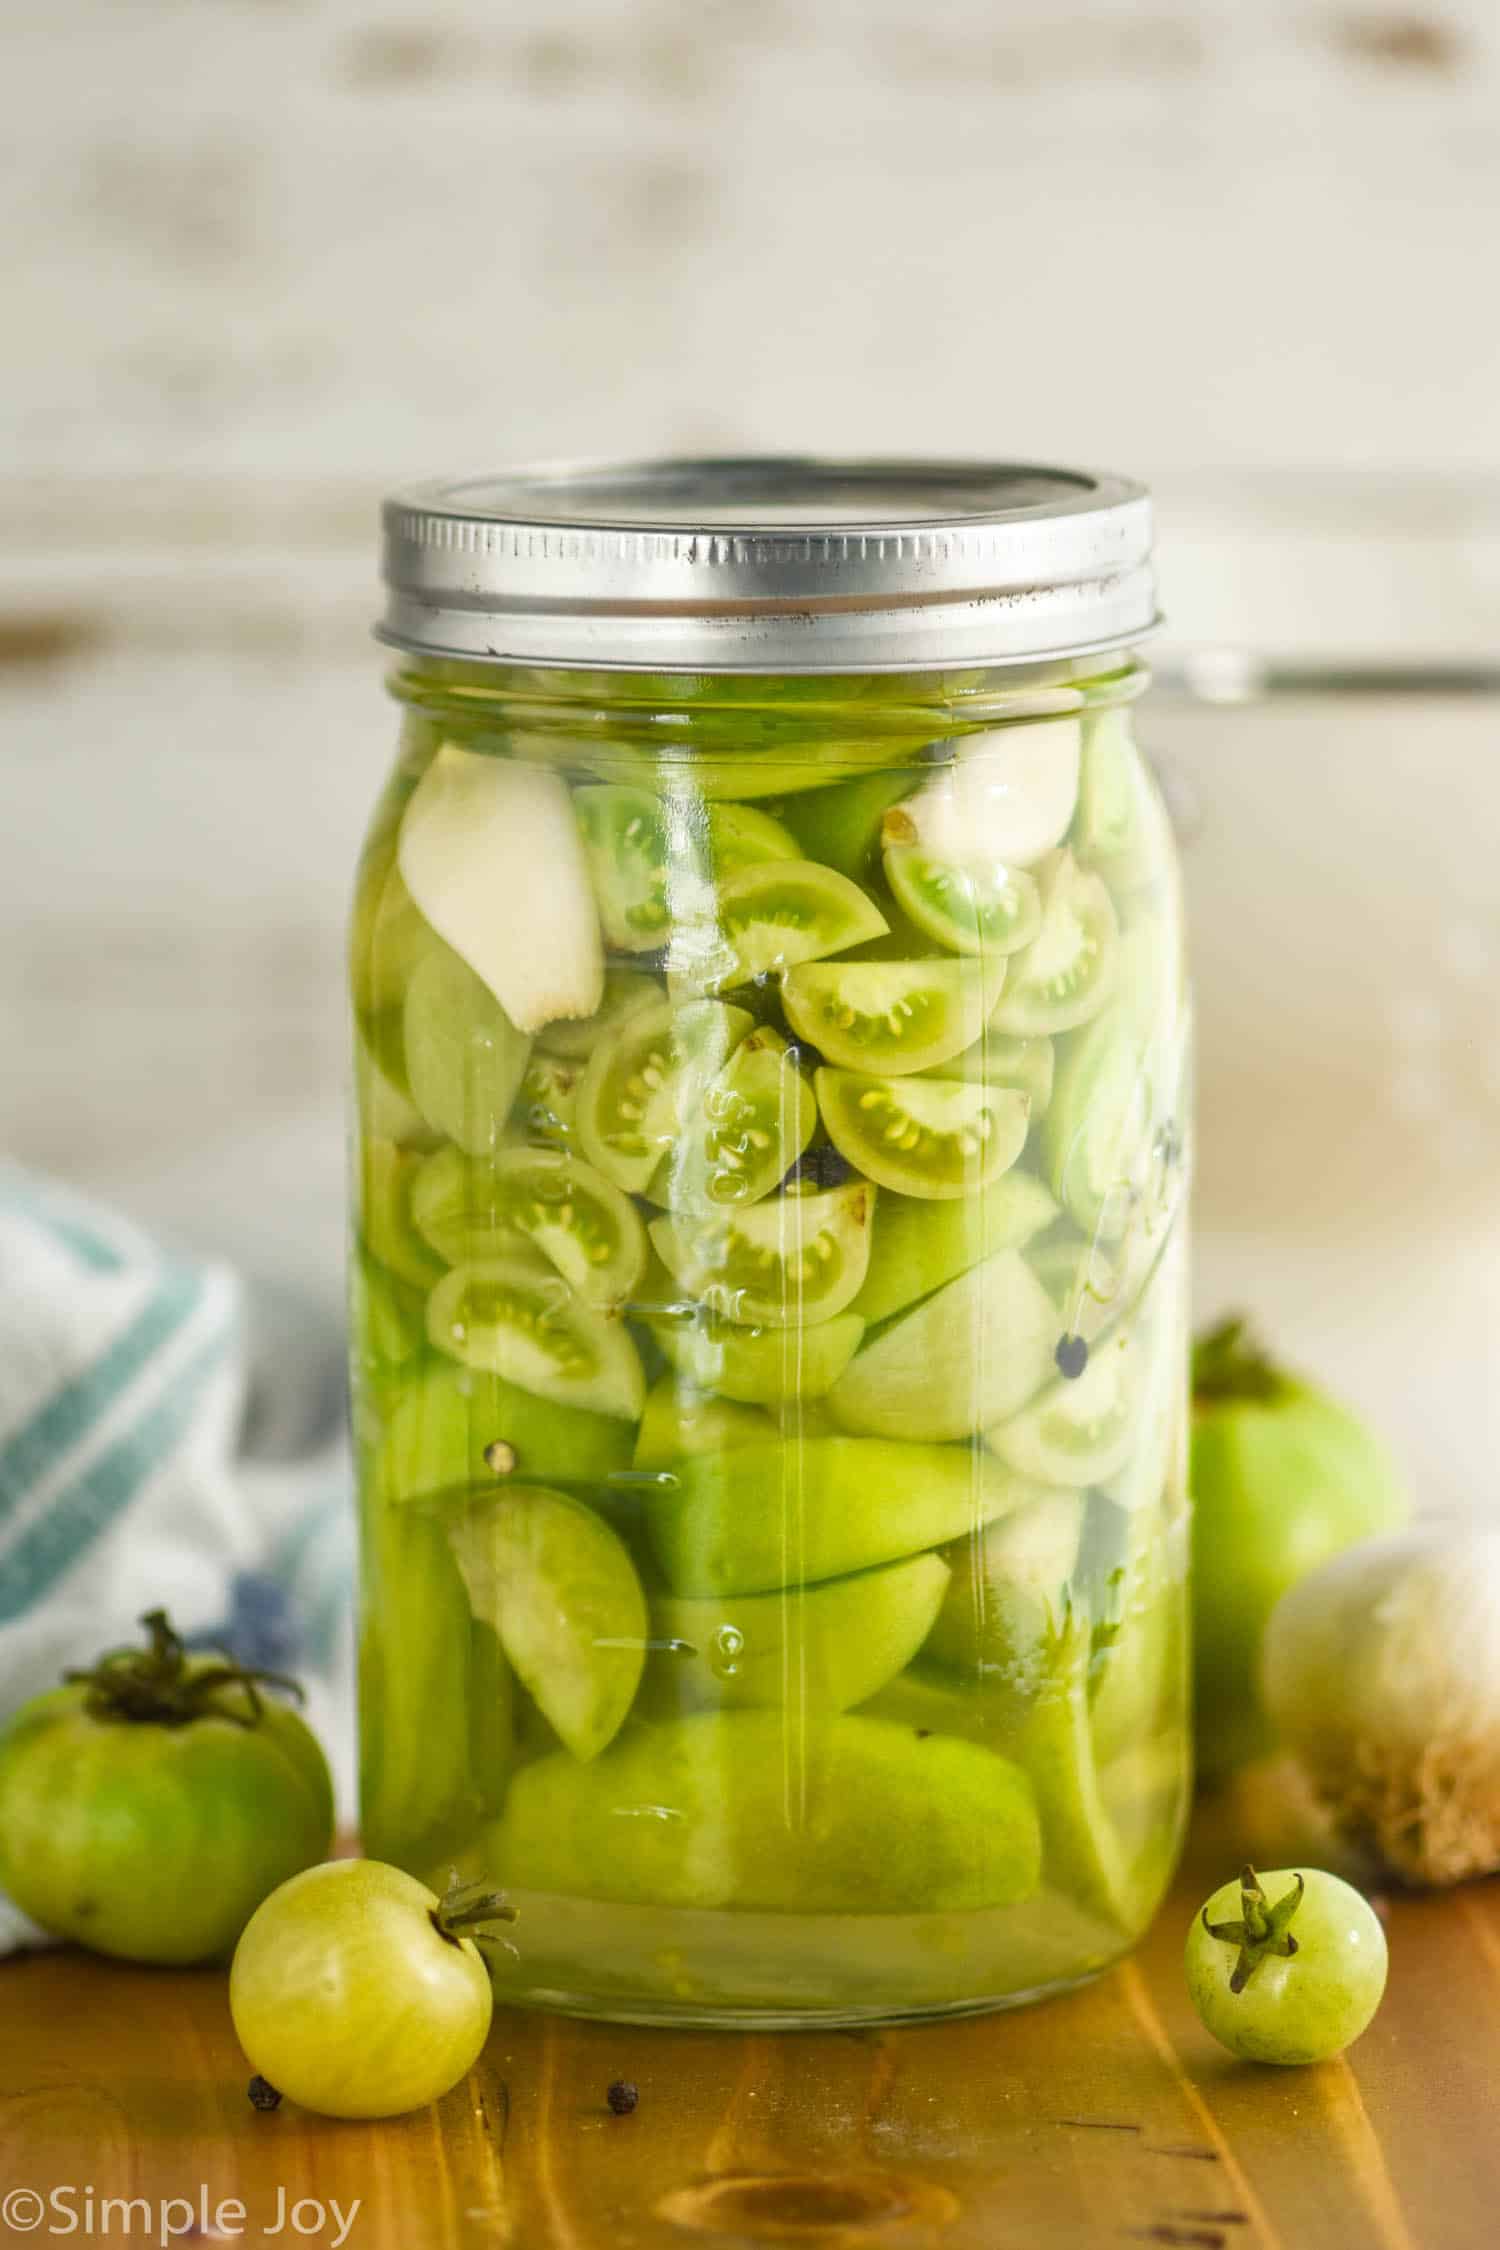 https://www.simplejoy.com/wp-content/uploads/2020/10/pickled-green-cherry-tomatoes.jpg